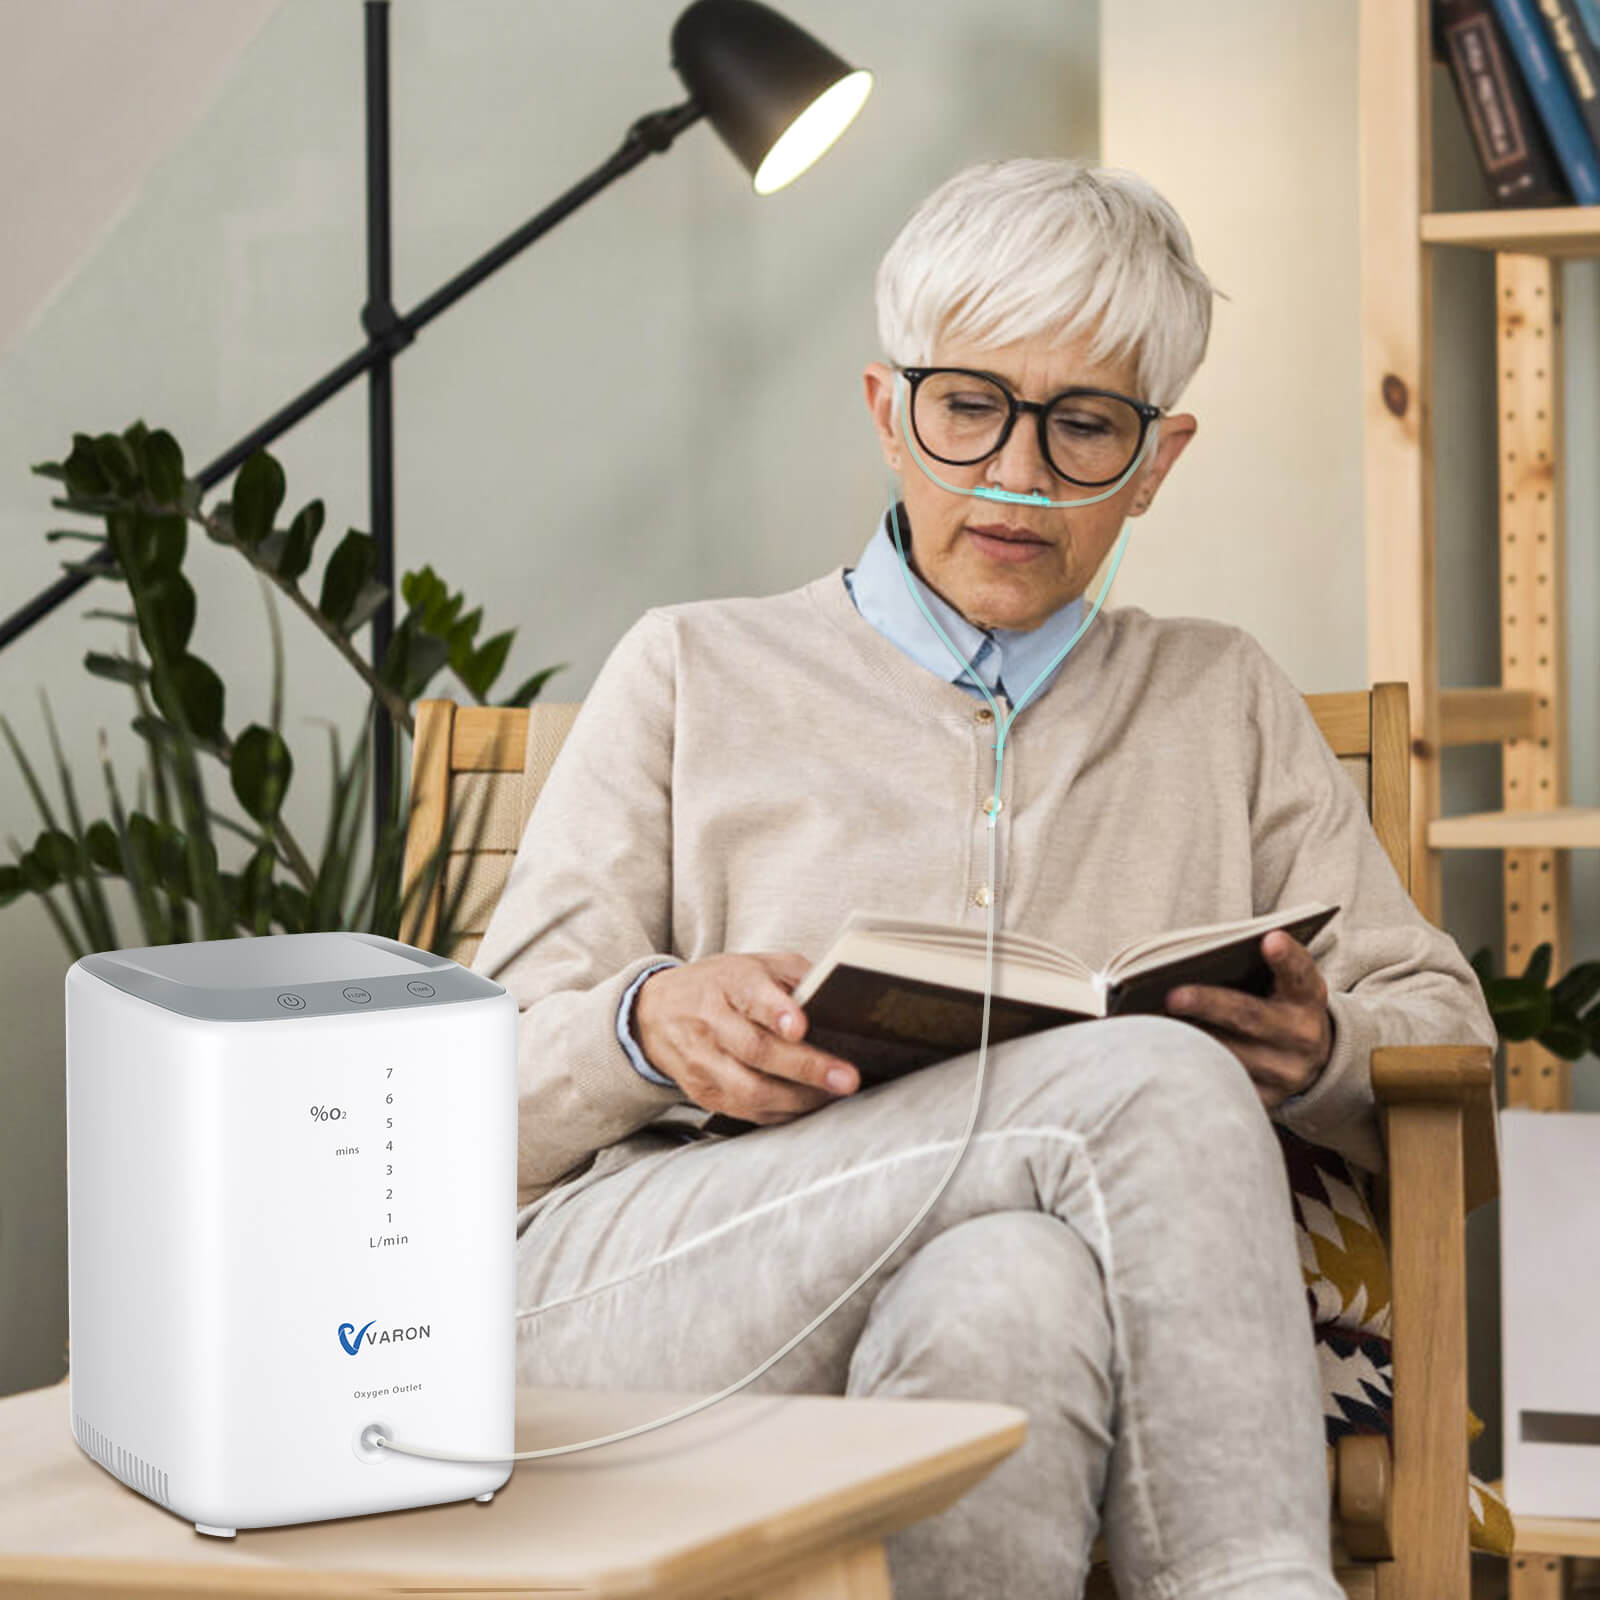 Best Selling 1-7L Home Oxygen Concentrator NT-04| 42 dB | Lightweight